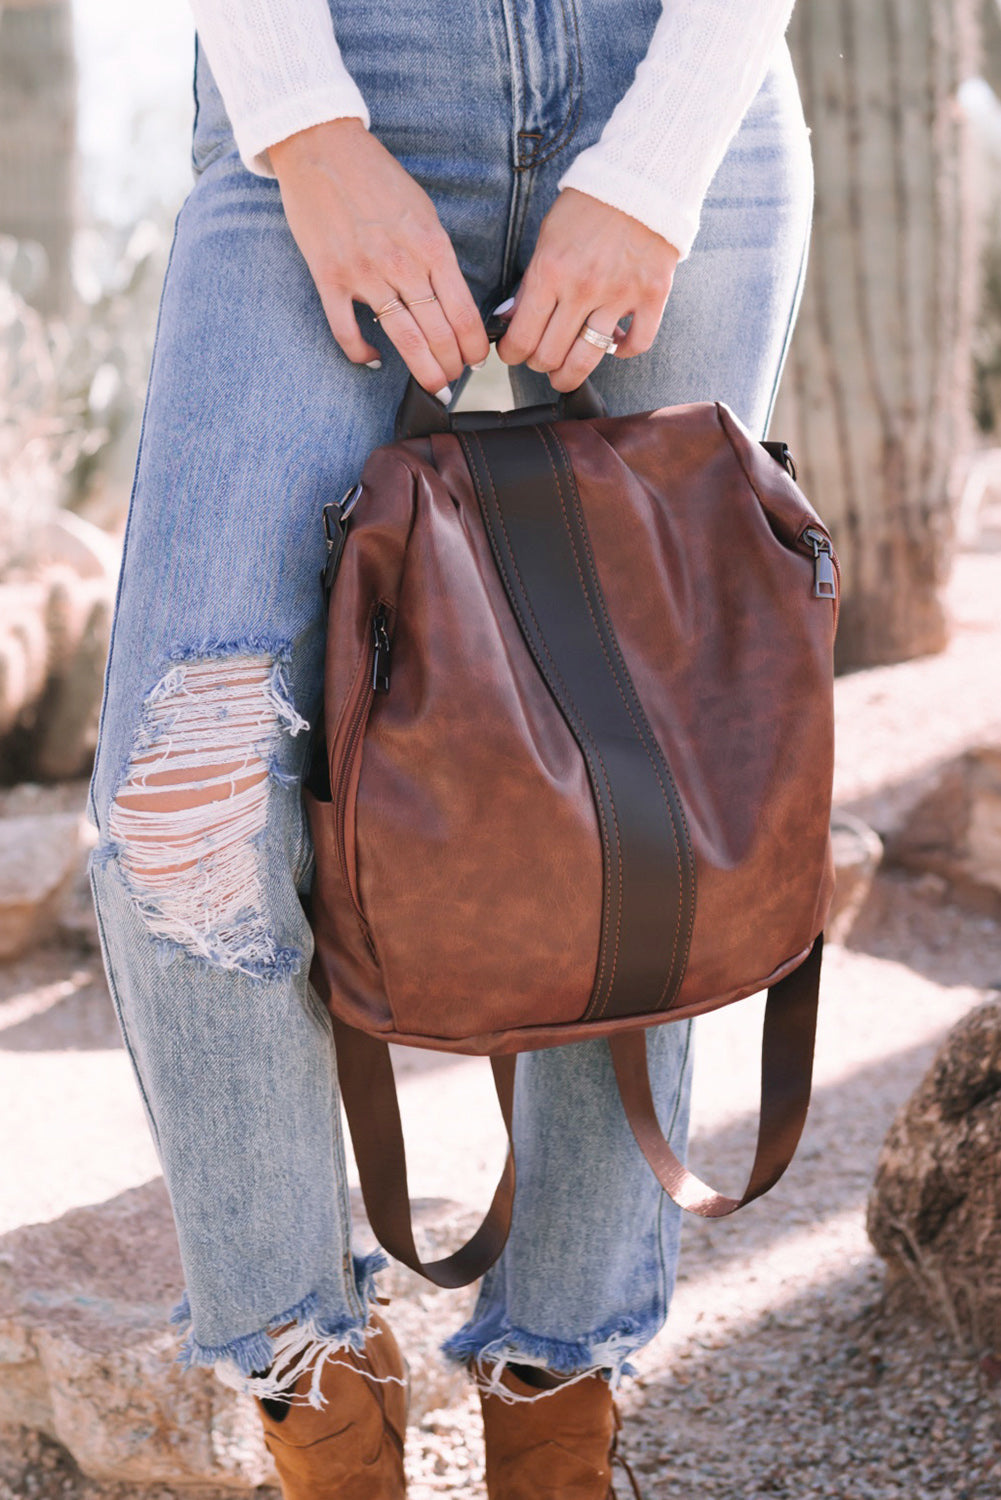 Cali Chic Brown Multifunctional Retro Faux Leather Backpack